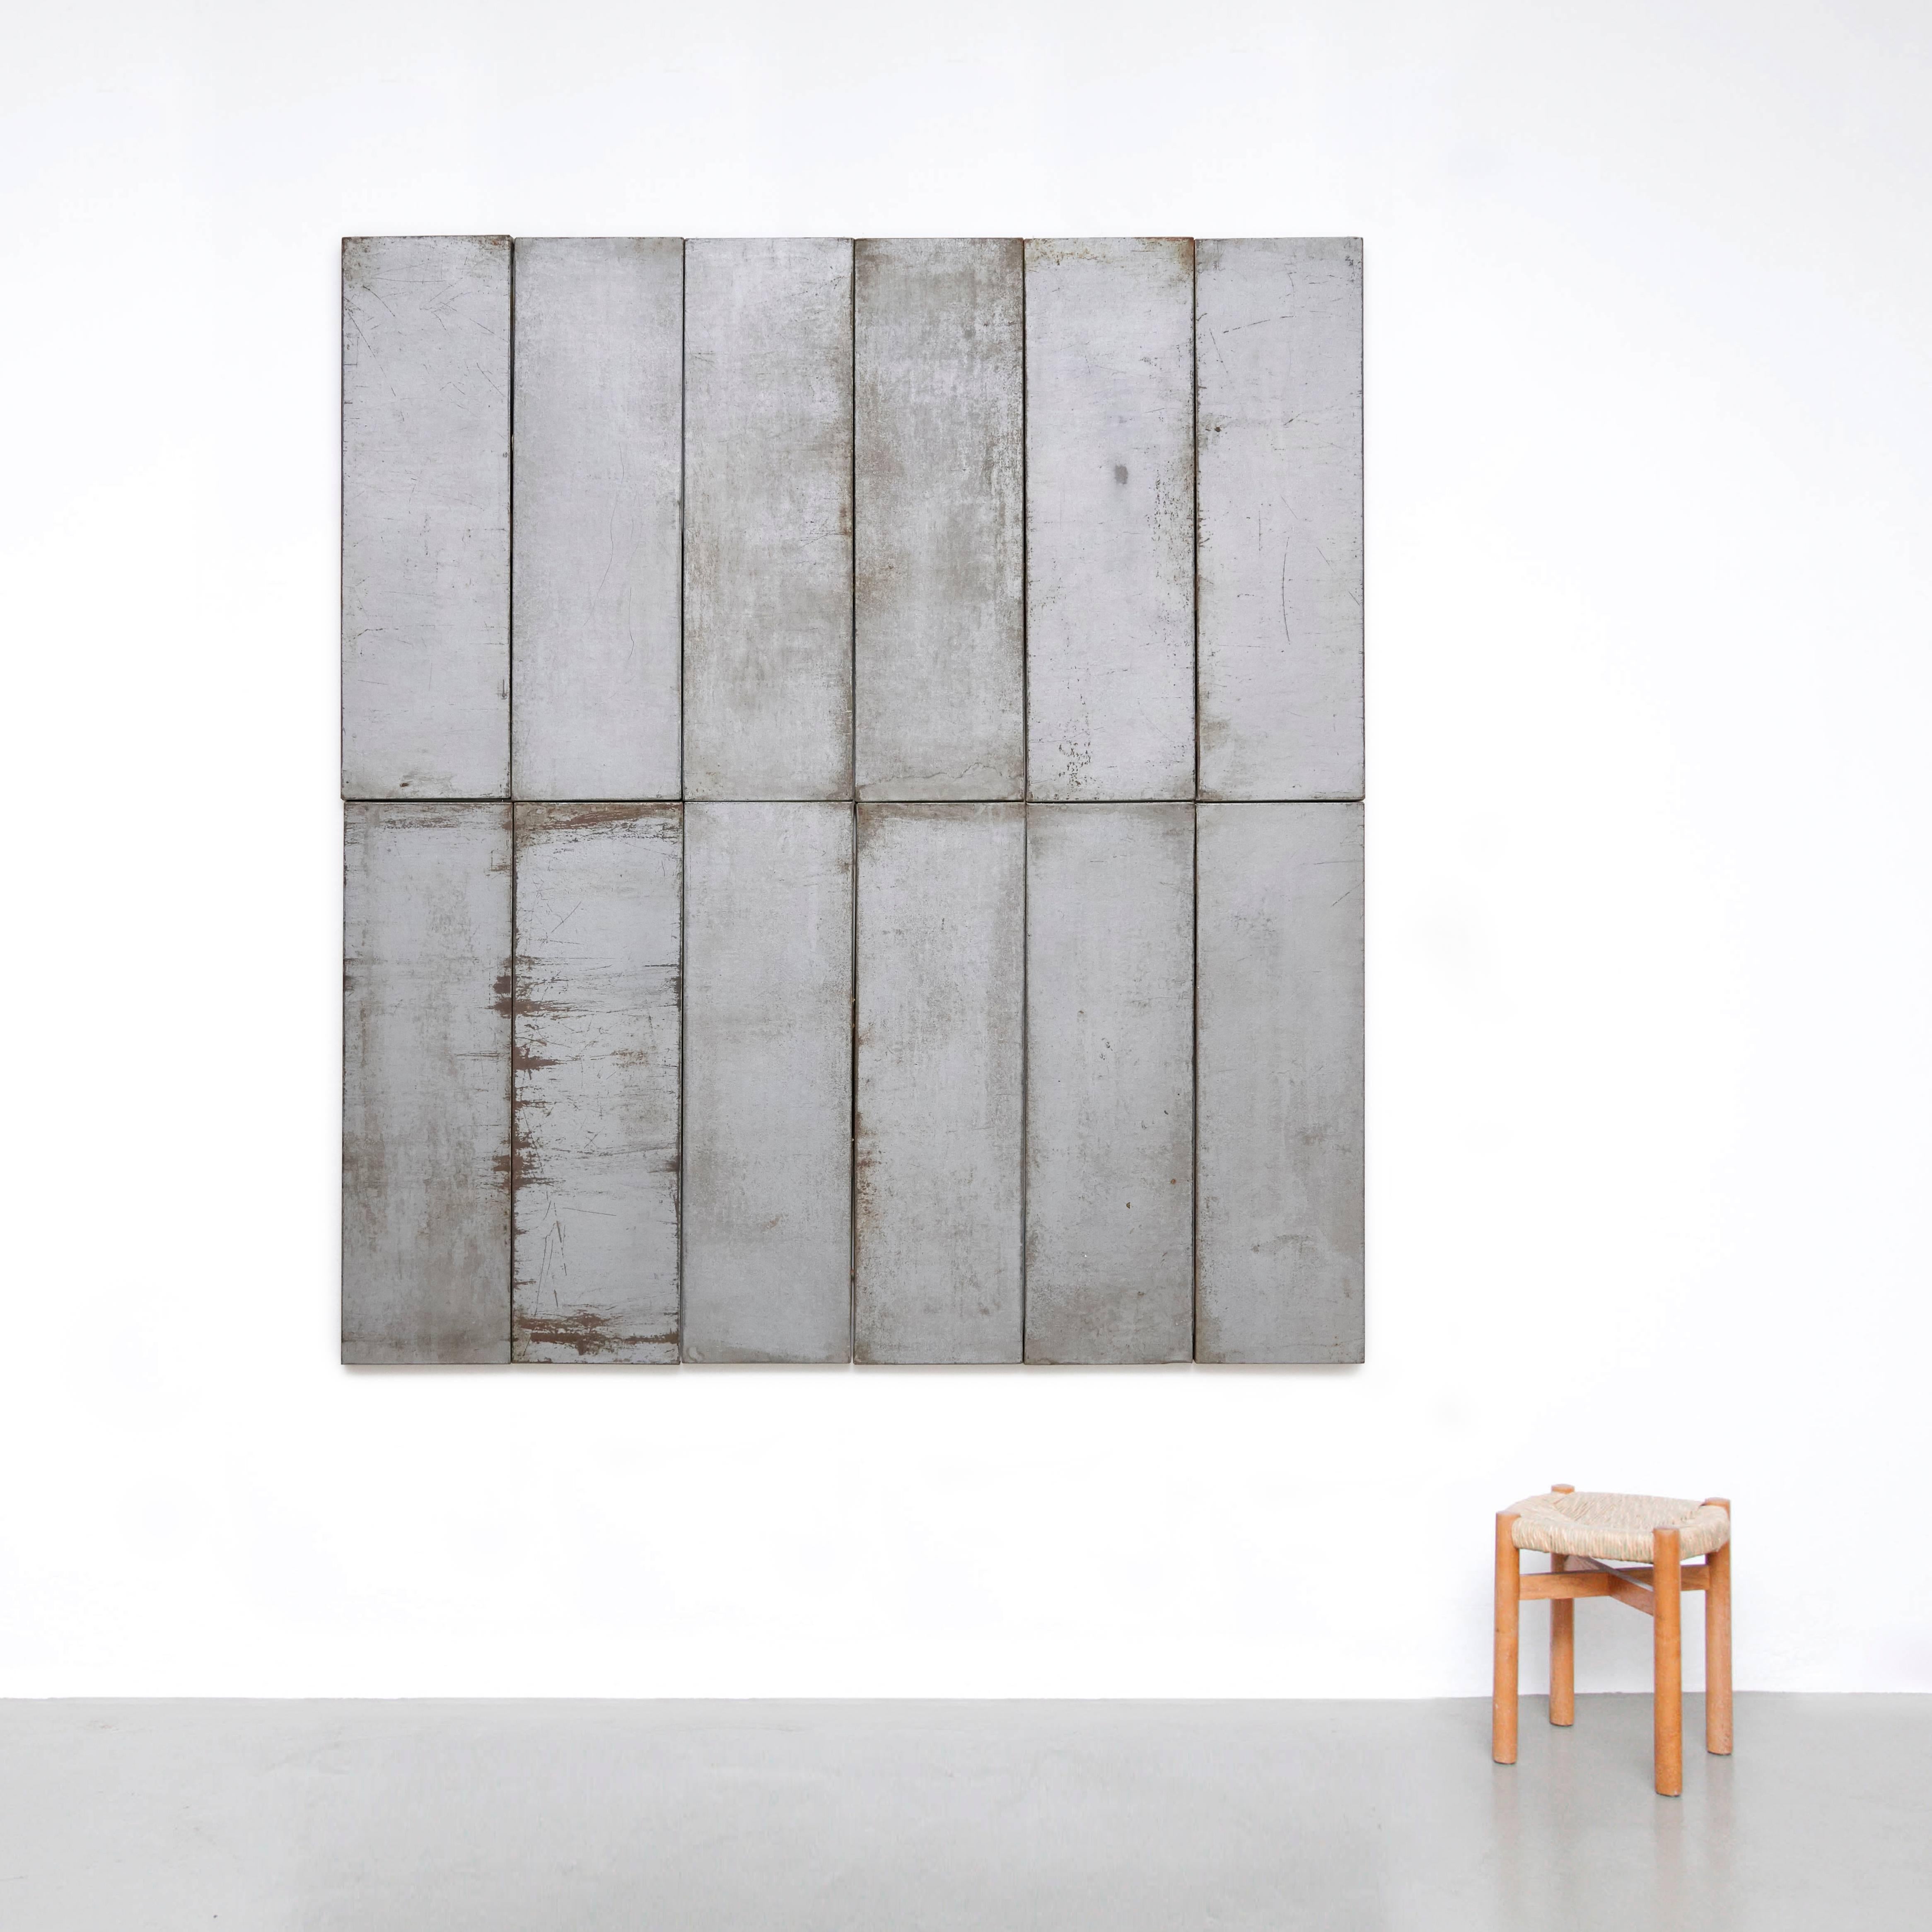 Ramon Horts, minimalism large artwork.

Structures of metal compositions made in Barcelona, circa 2016. For a solo Exhibition.
Signed by himself in engraving punch.

Scraped metal, rusted and varnished.

In original conditions.